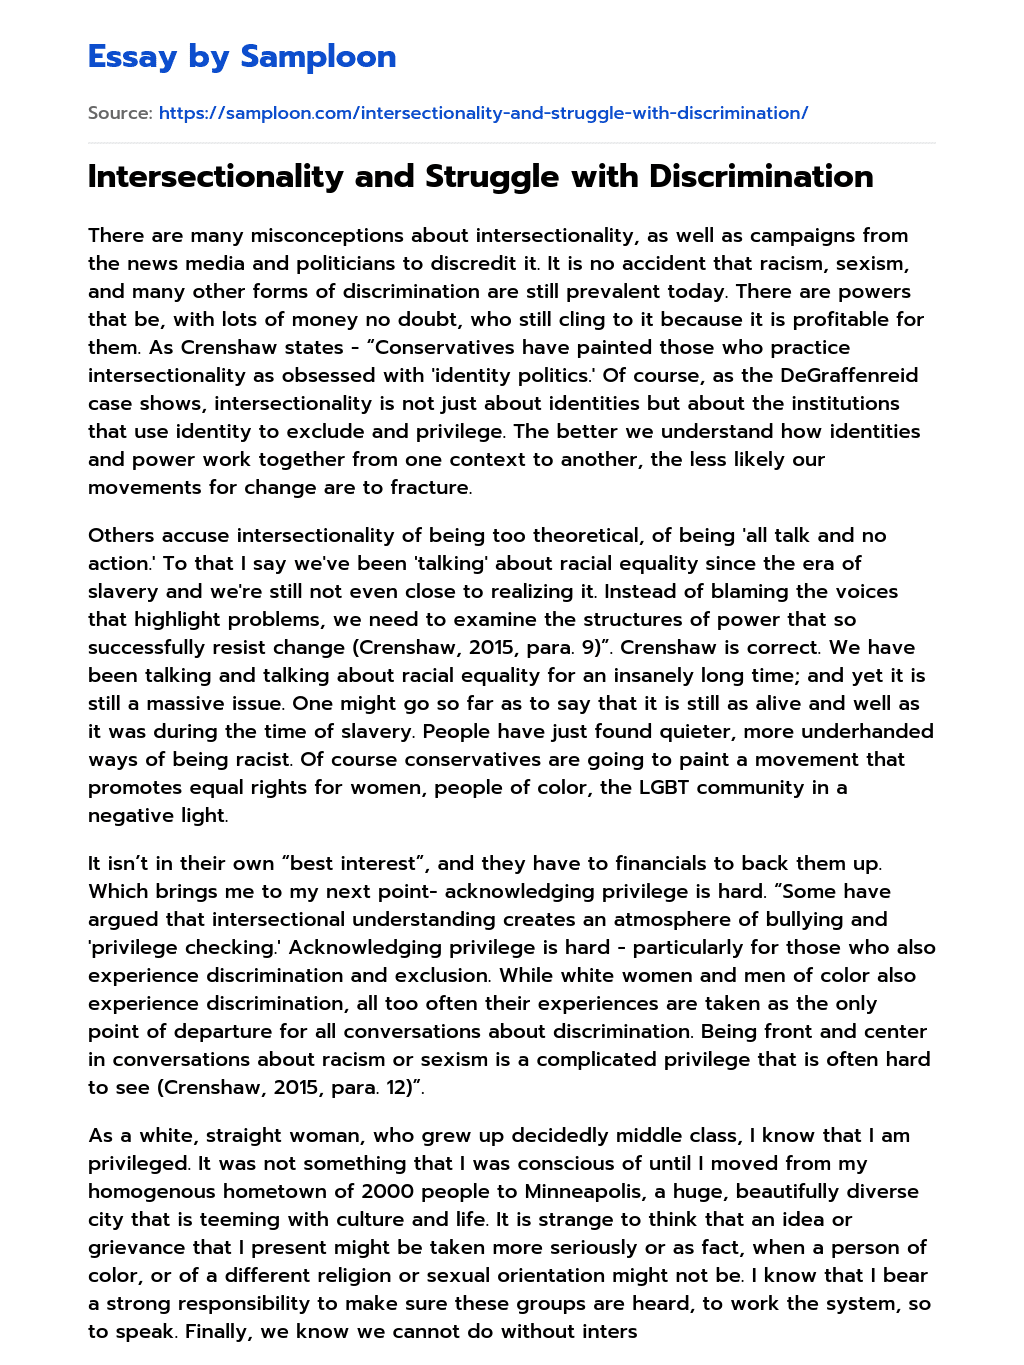 Intersectionality and Struggle with Discrimination essay